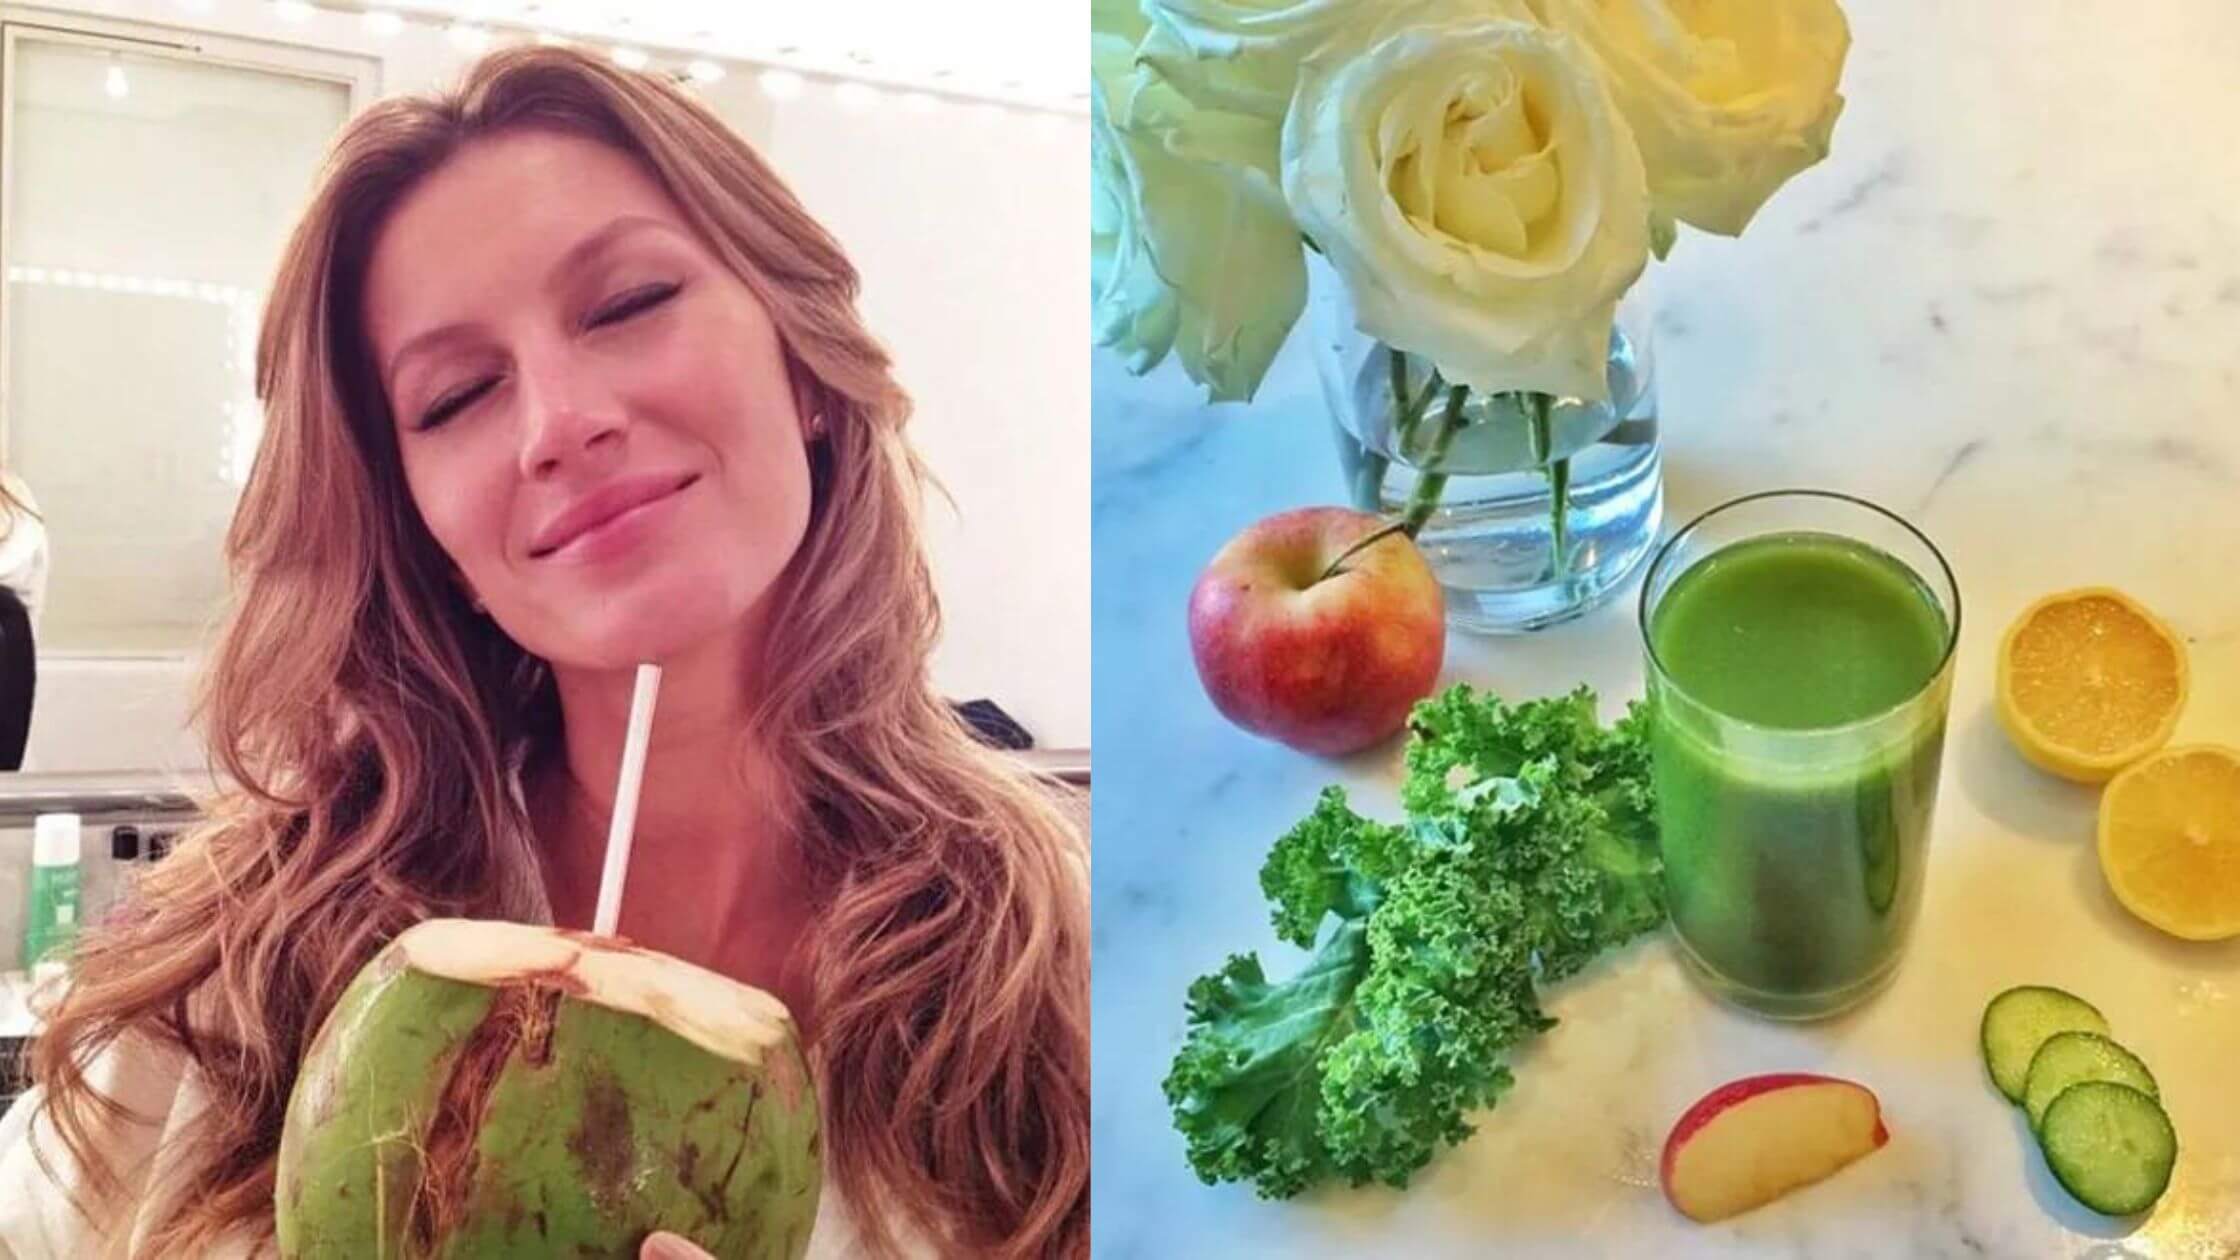 Adopting The Intermittent Fasting And Smoothie-Eating Methods Of Gisele